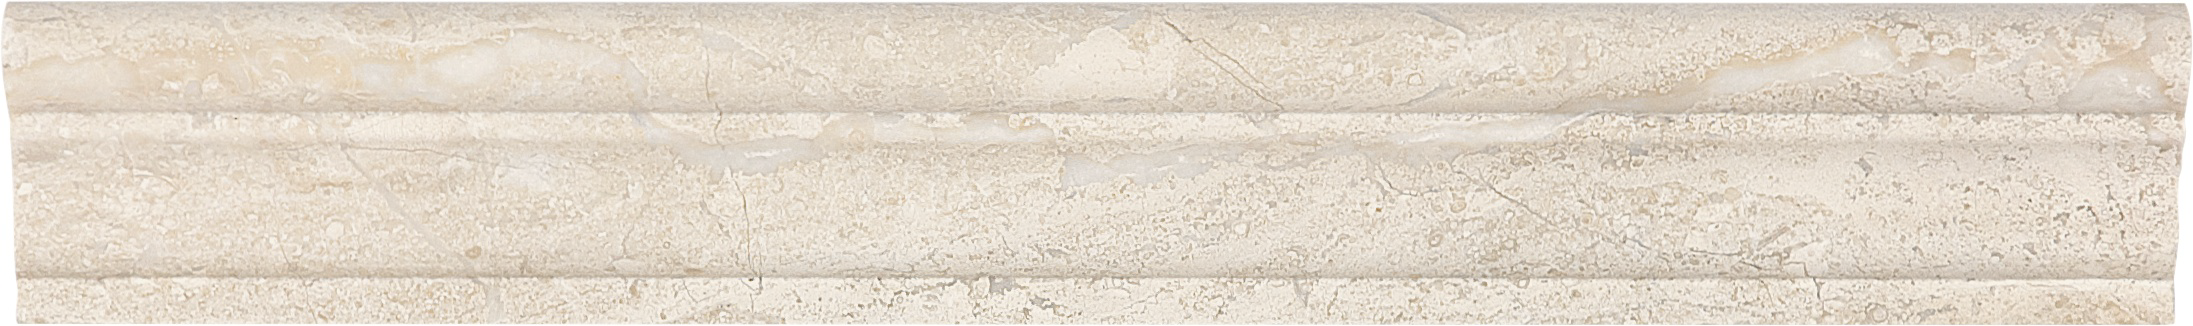 marble pattern natural stone chairrail molding from impero reale anatolia collection distributed by surface group international honed finish straight edge edge 2x12 bar shape